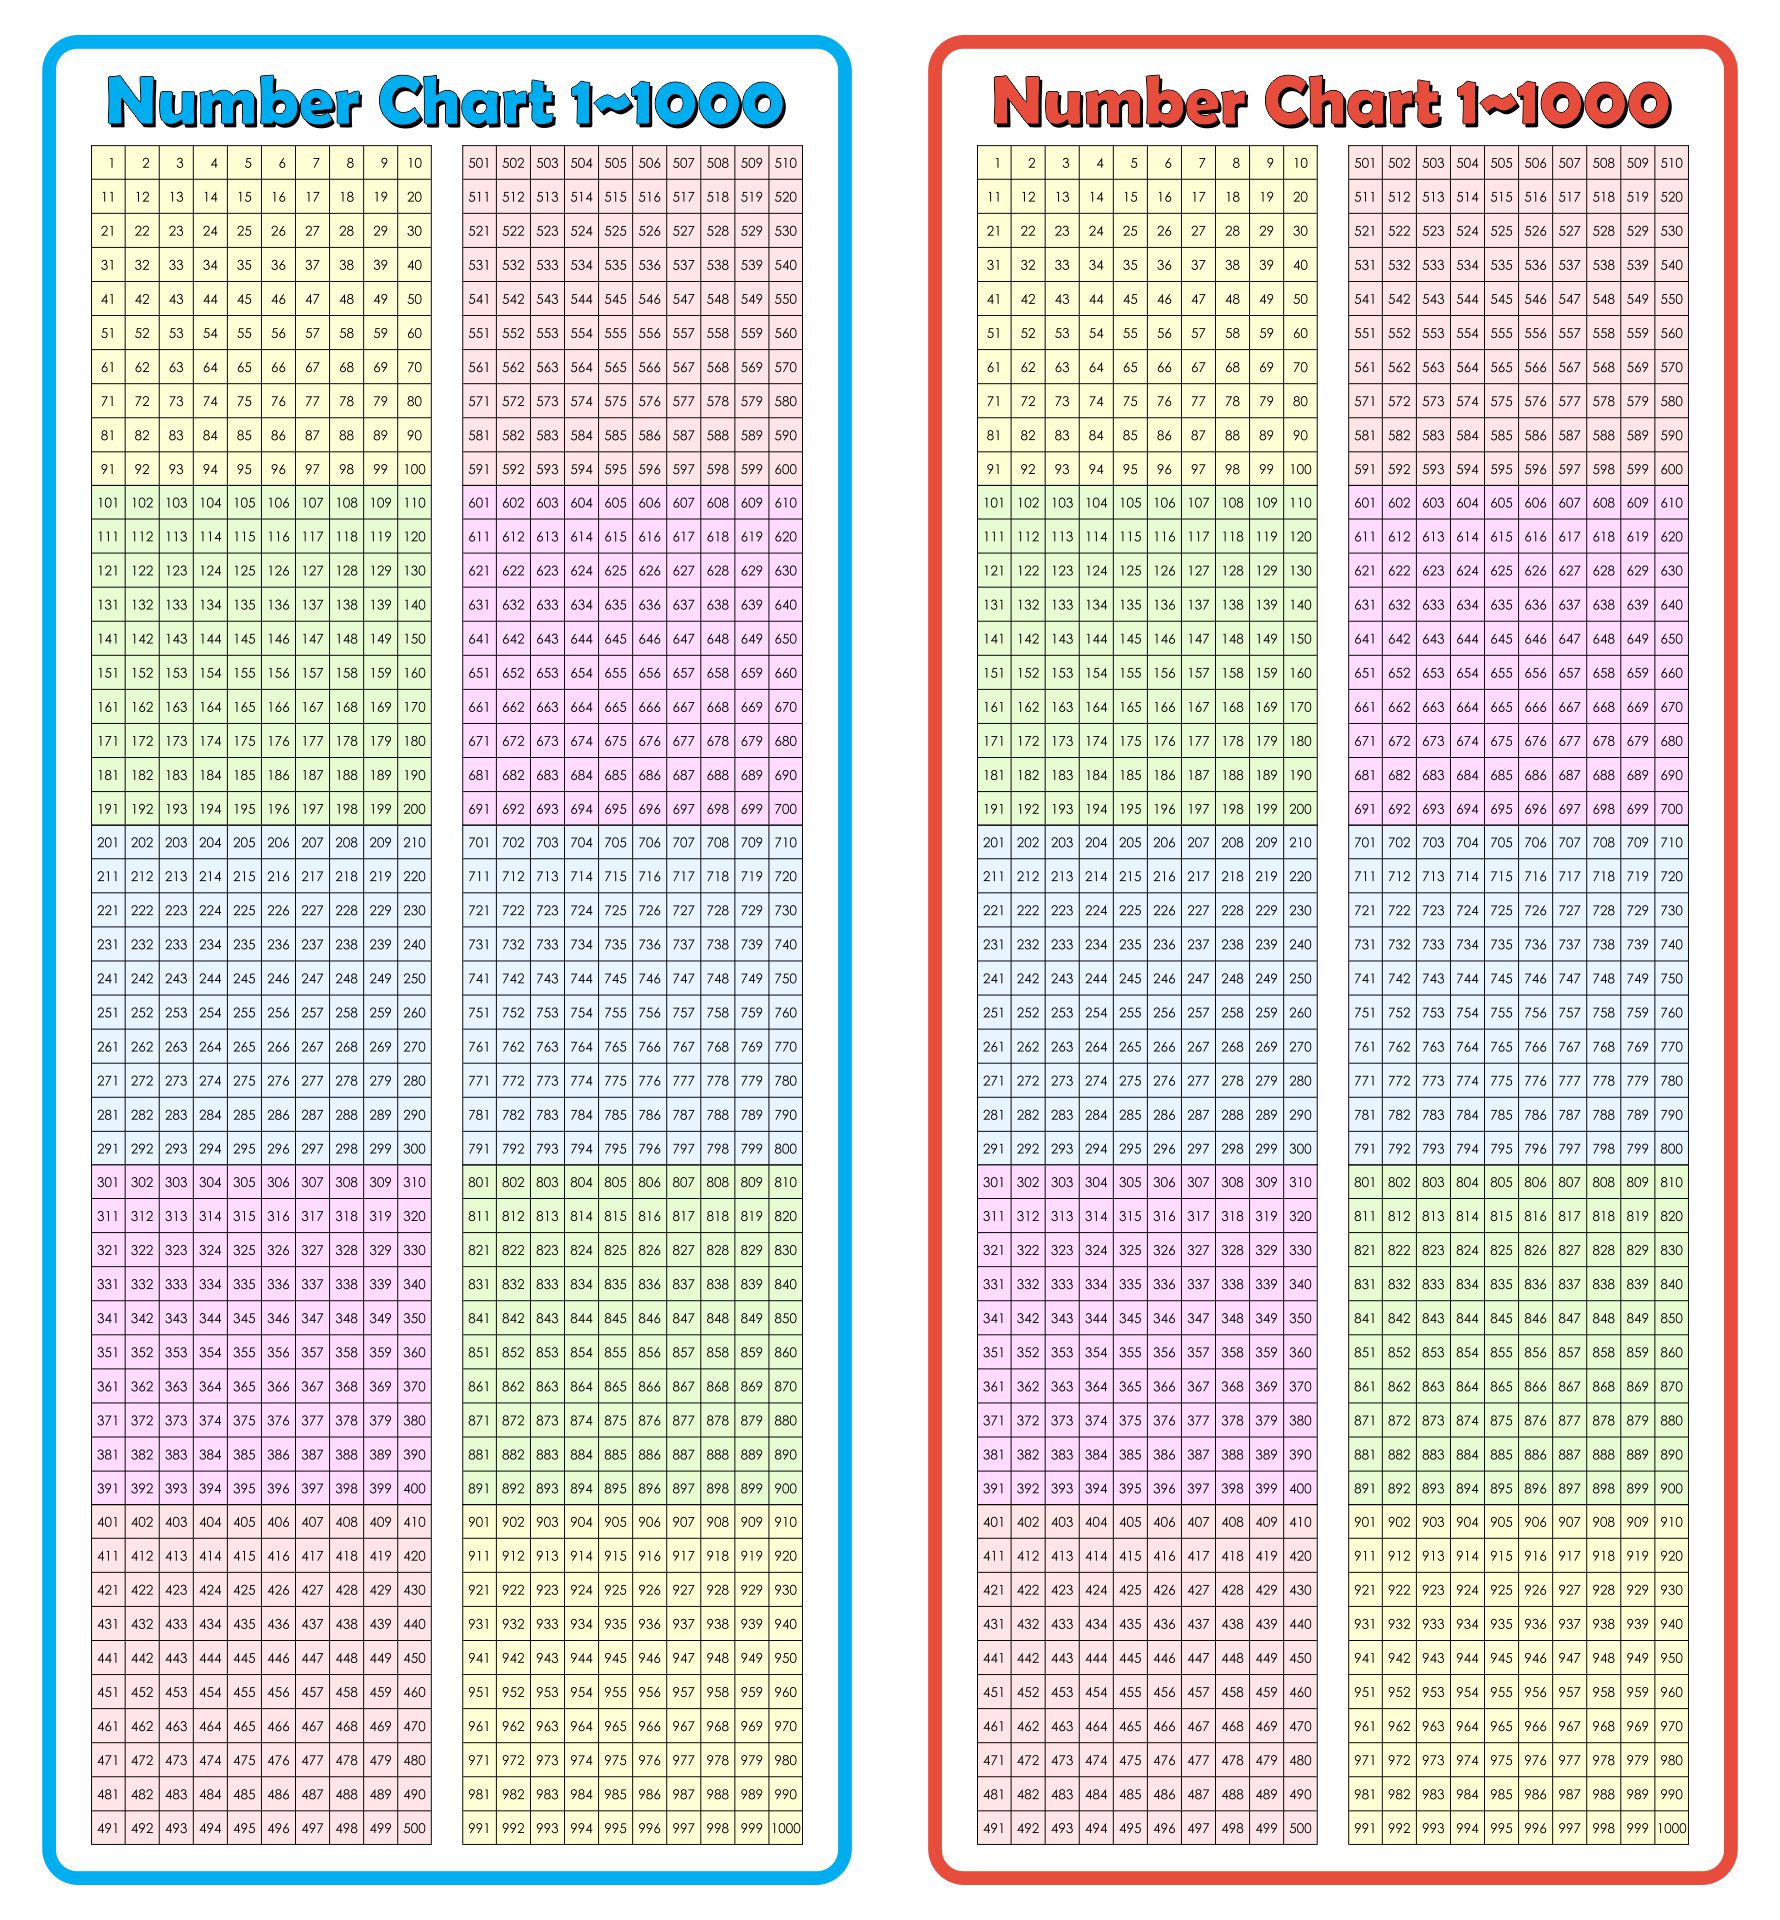 4 Best Images of 400 Number Grid Chart Printable - Number Chart 1-1000